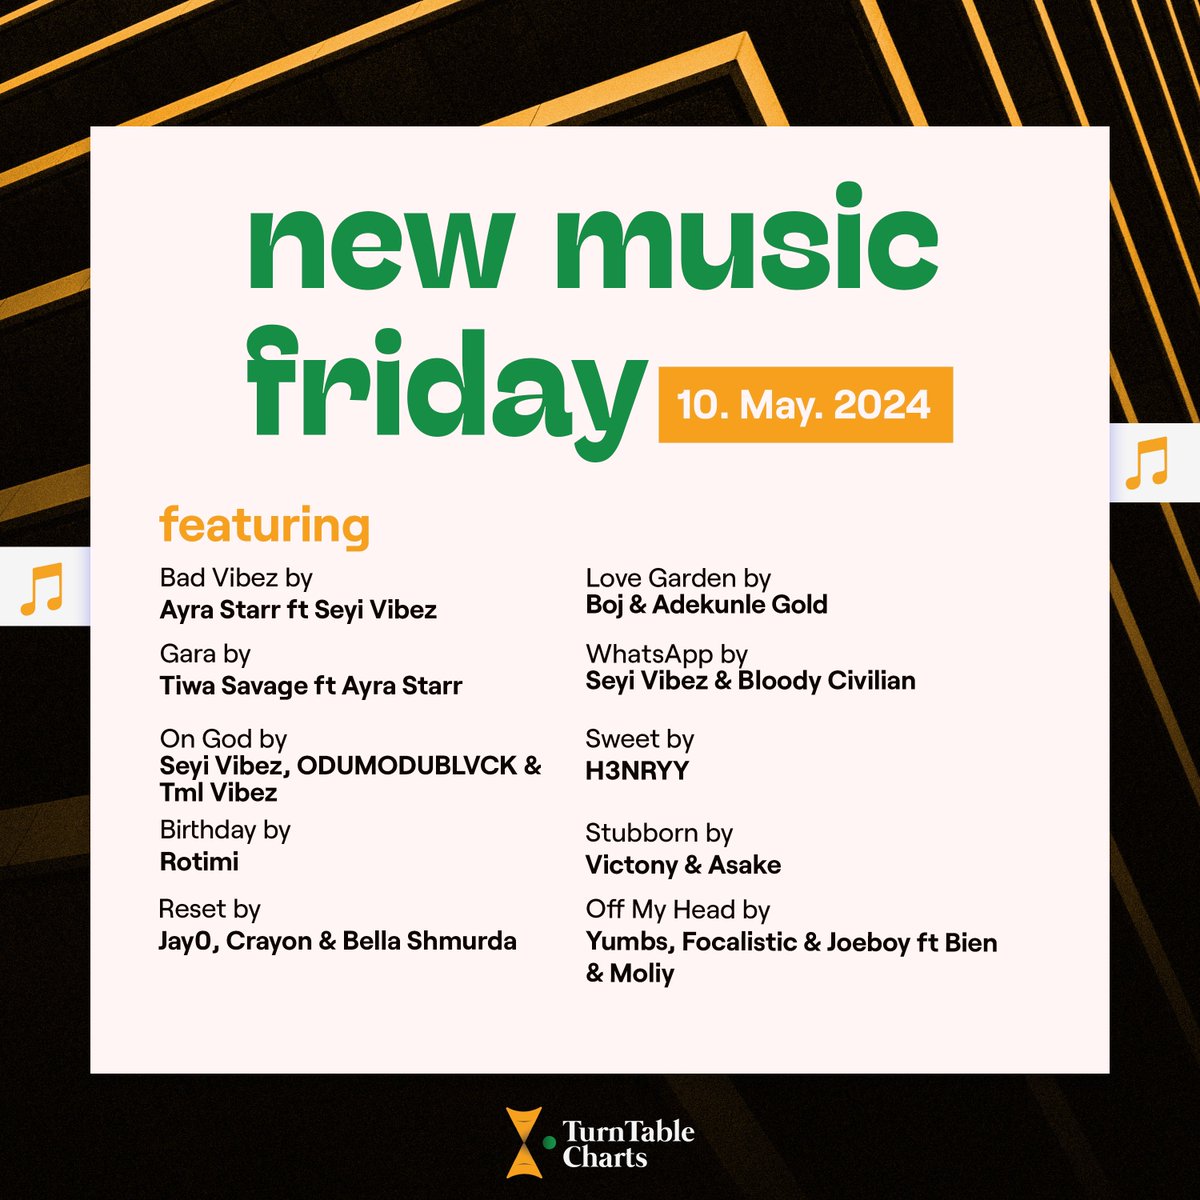 Listen to latest releases from established and emerging artistes on New Music Friday on TTC The playlist features music from @ayrastarr, @vict0ny, @seyi_vibez, @Rotimi, @TiwaSavage & more Listen here fanlink.tv/NMFonTTC